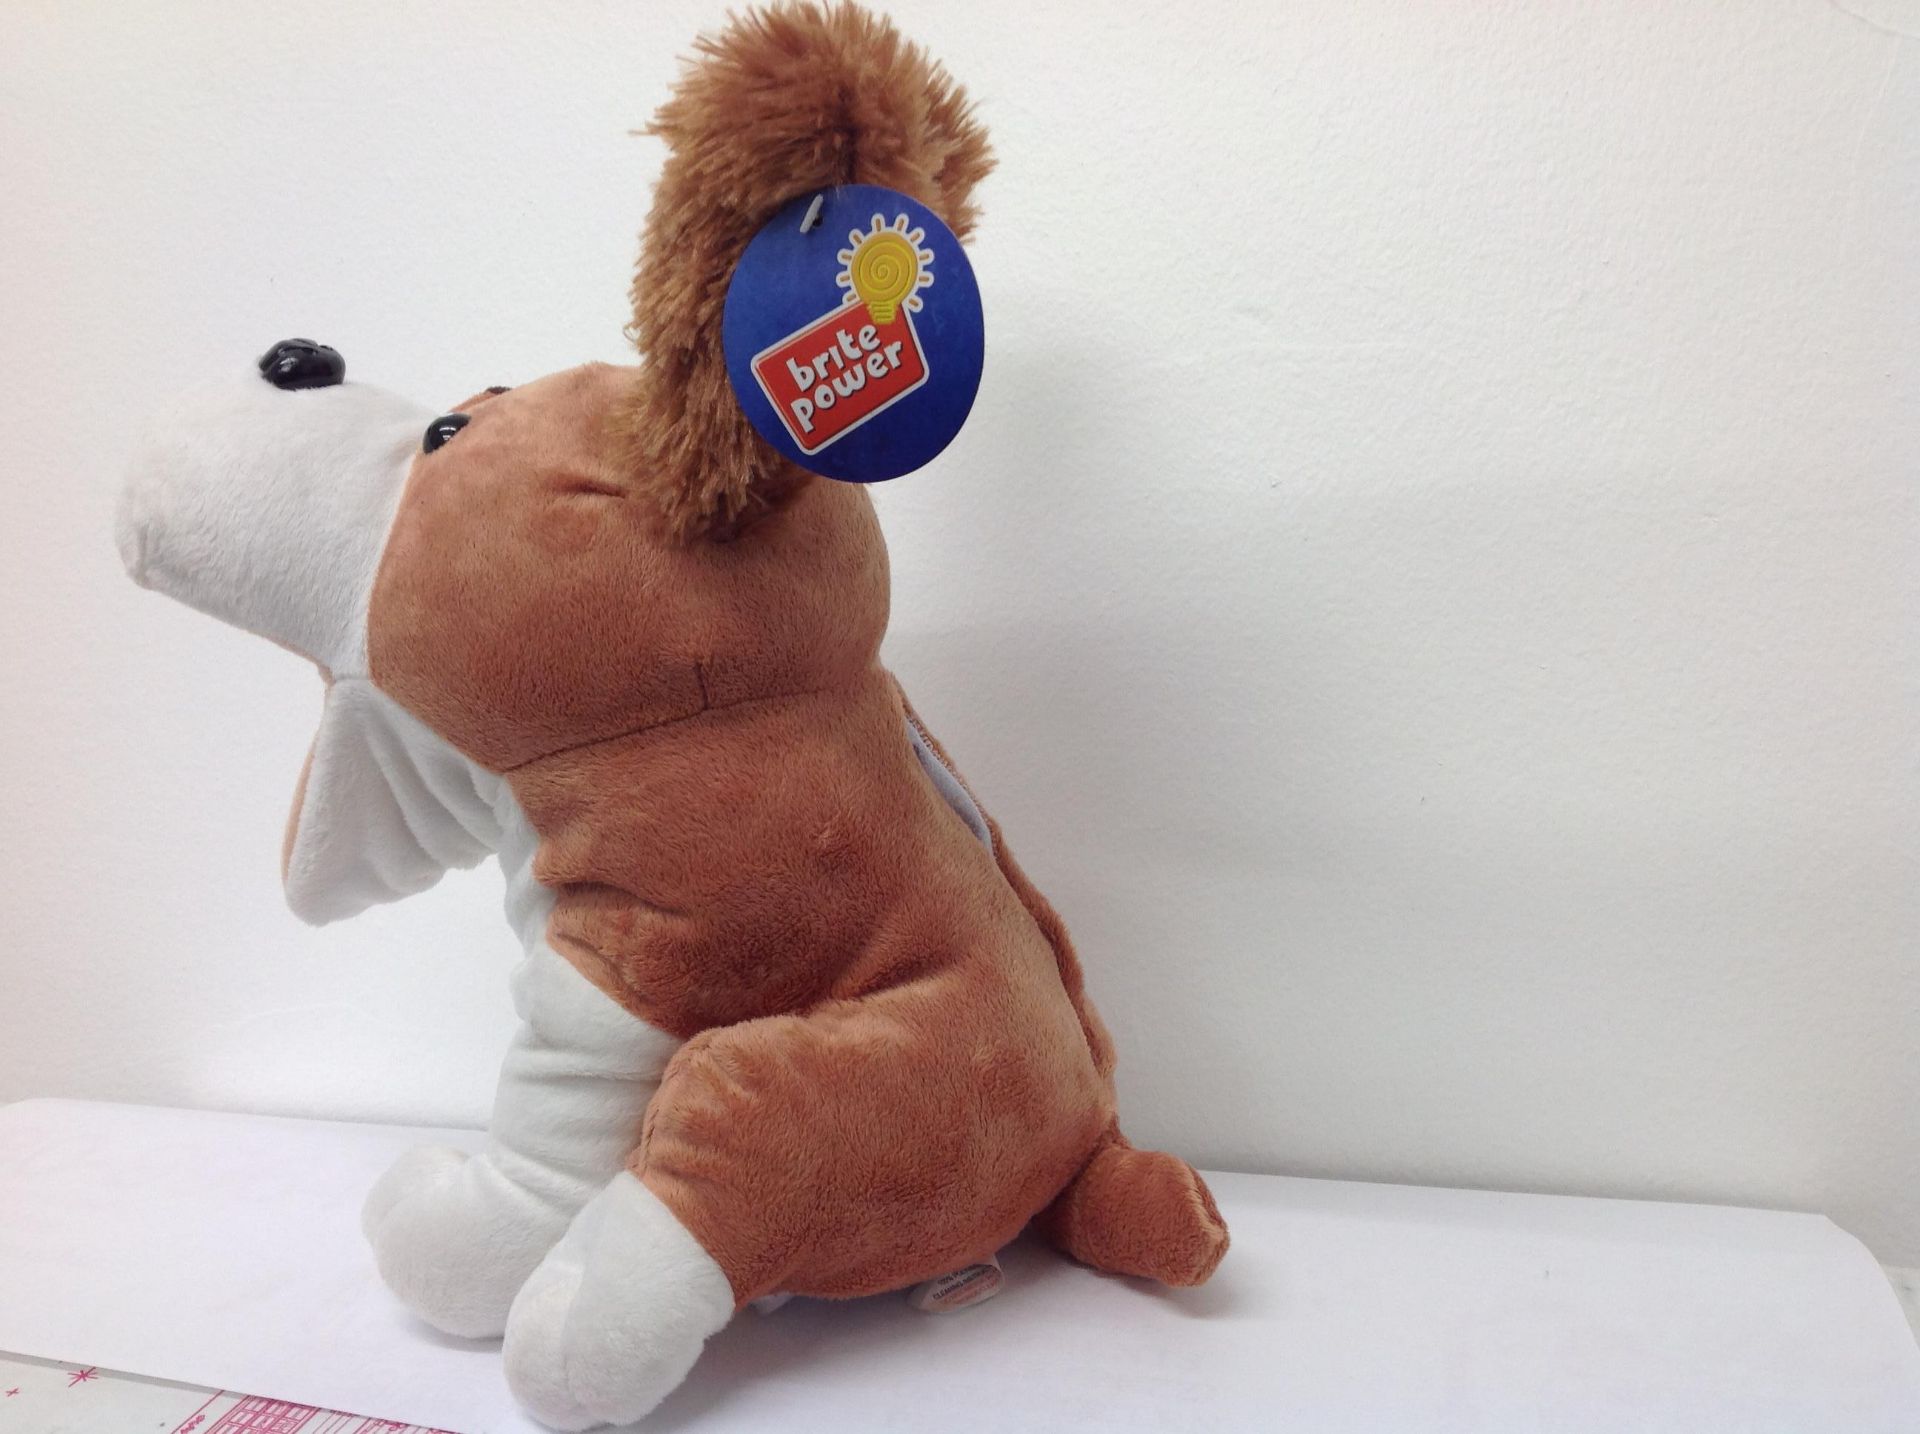 20 x Brite Power Talking Large Dog Hand Puppet. Brand new stock. RRP £19.99 each - Image 3 of 4